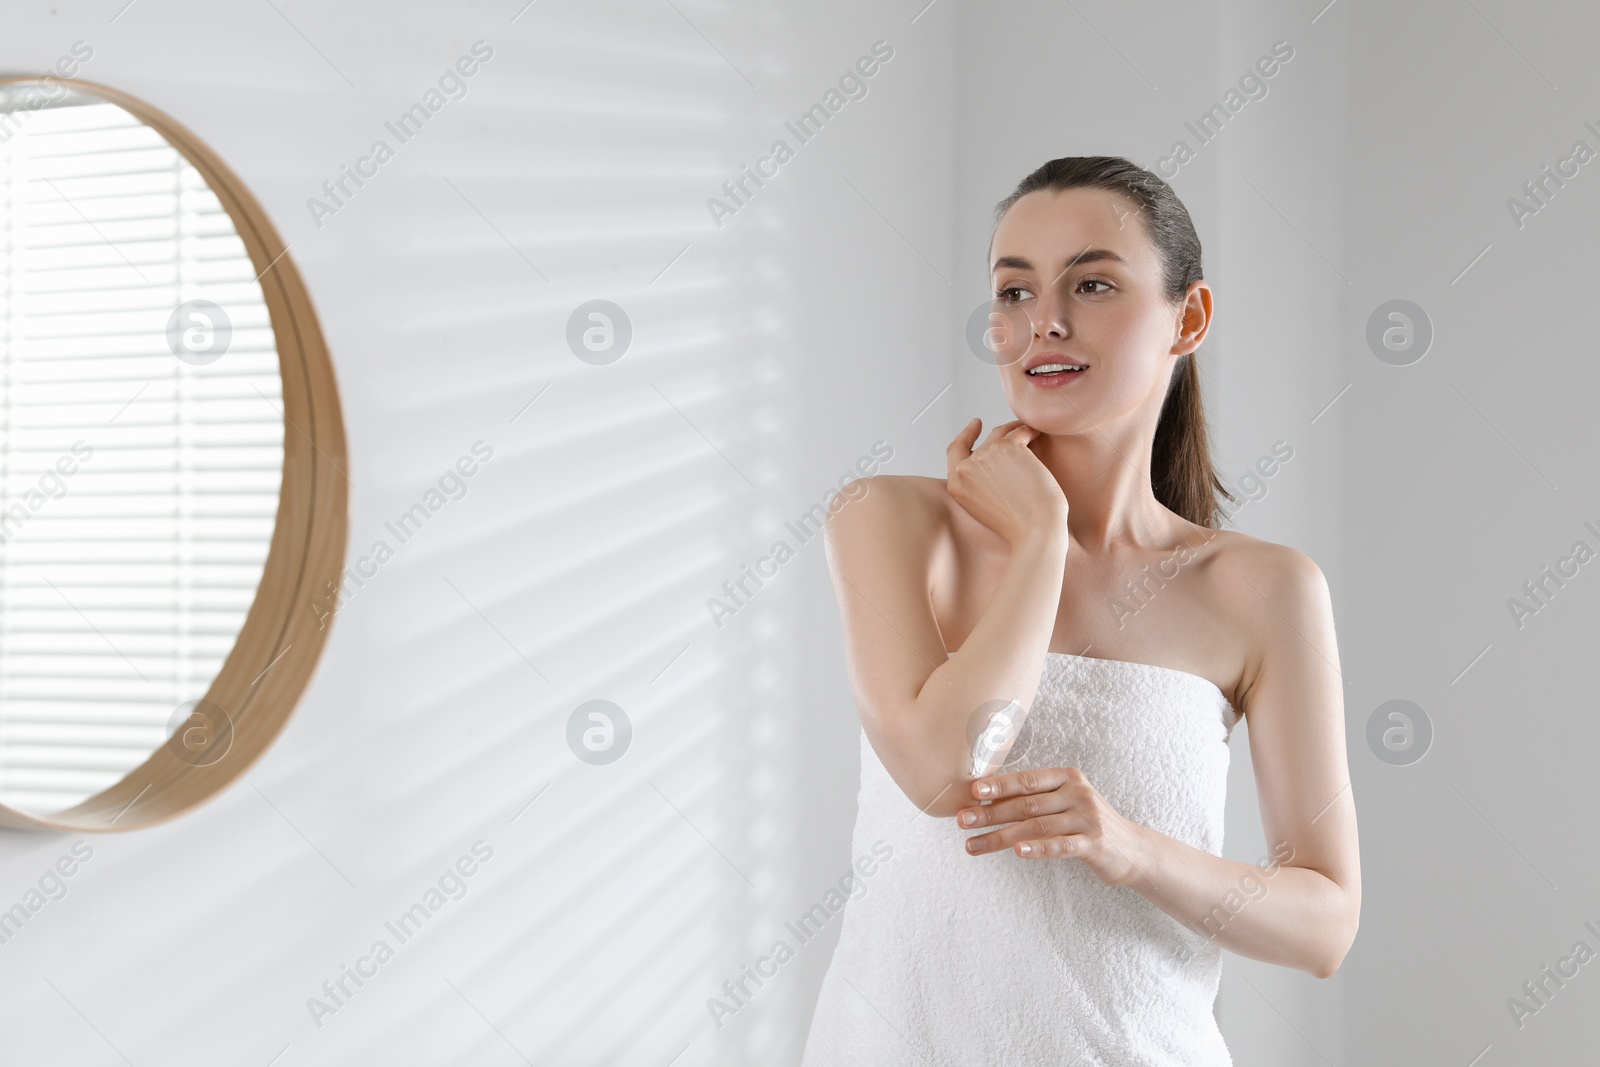 Photo of Beautiful woman applying body cream onto elbow in bathroom, space for text